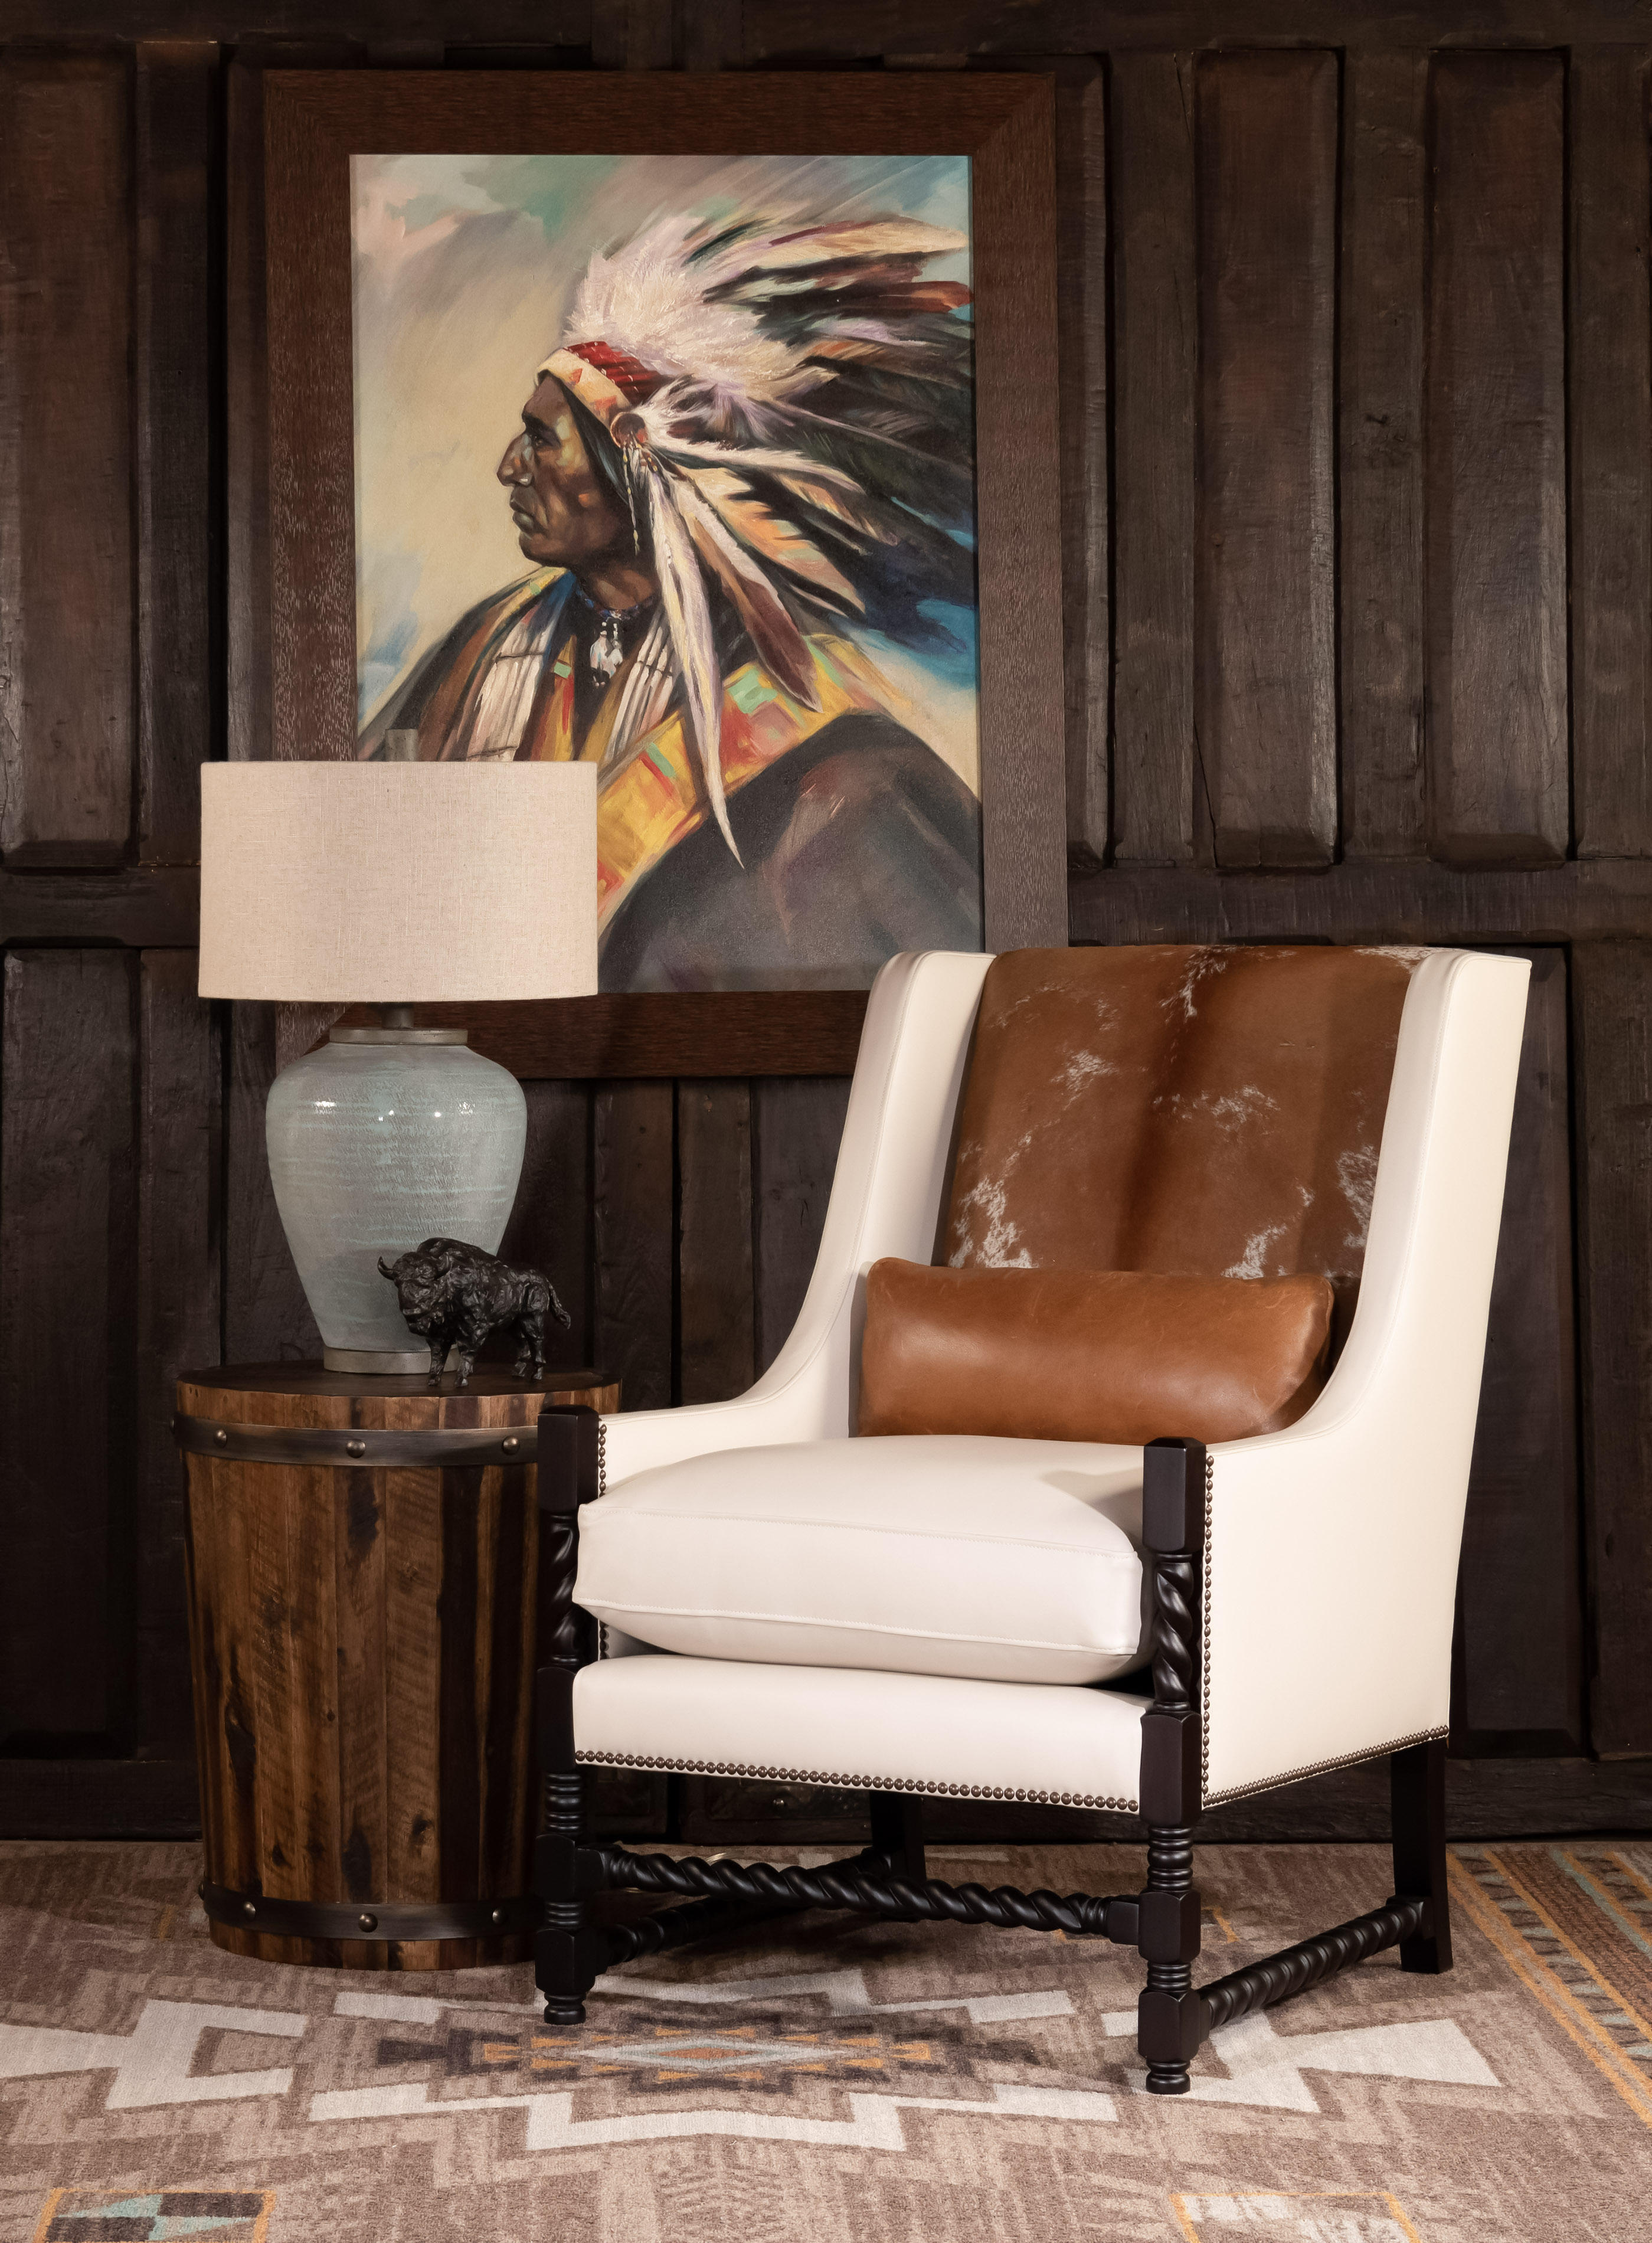 The Bandera Leather Chair not only boasts in beauty, but in comfort as well. Made with 100% top grain leather and premium cowhide accents. Our Bandera Leather Chair is perfect to brighten up your living space, office, or bedroom. The neutral and light color tones of the Bandera Leather Chair allow you to easily contrast darker furniture and decor pieces. This fine leather chair is 100% American Made to the highest standards of quality!